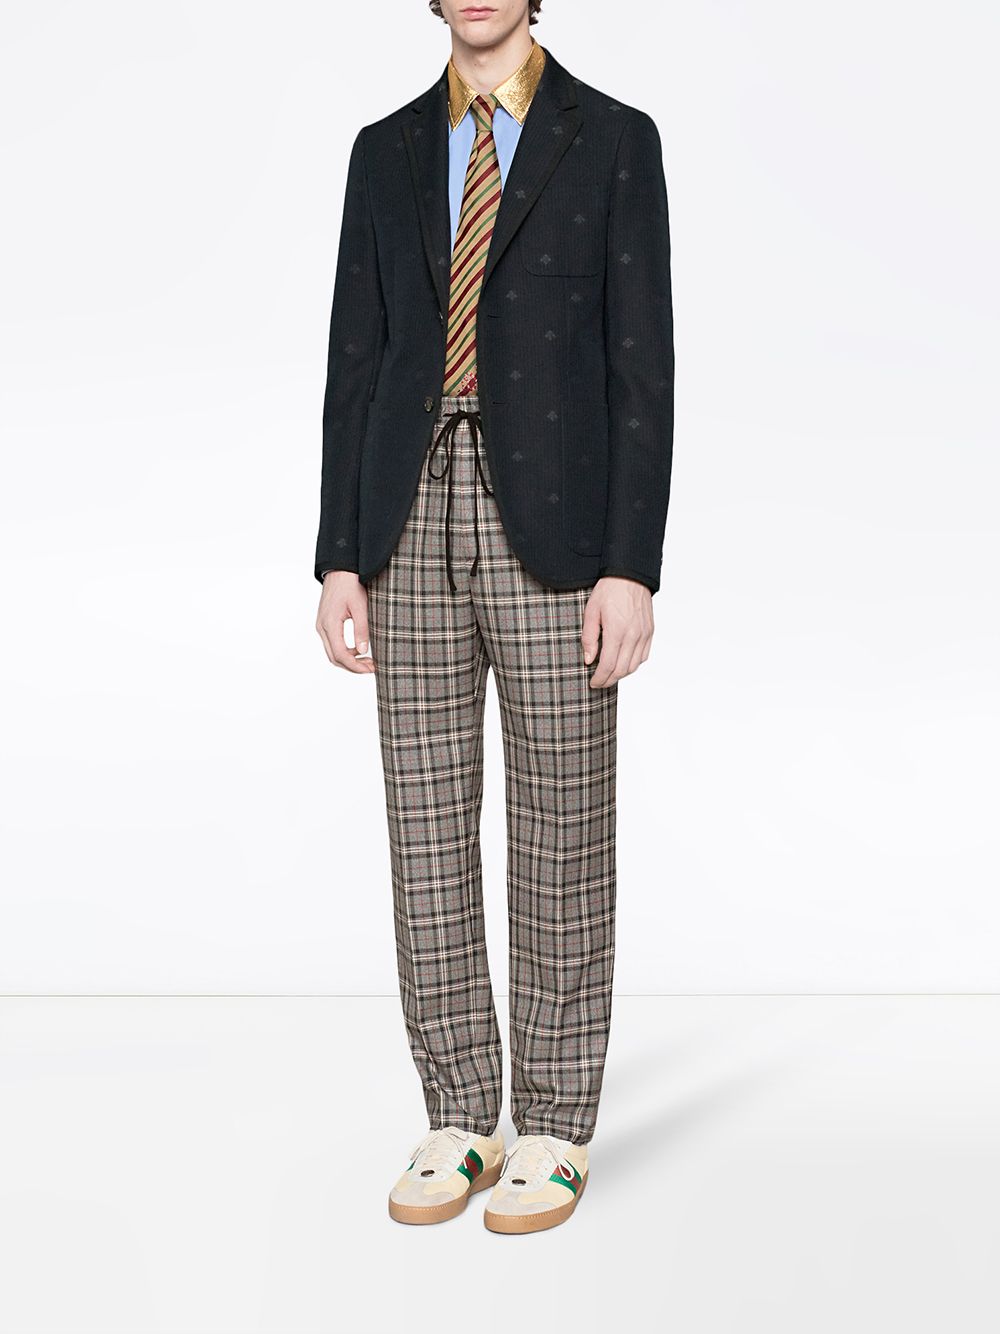 Gucci Monaco Striped Jacket With Bees - Farfetch